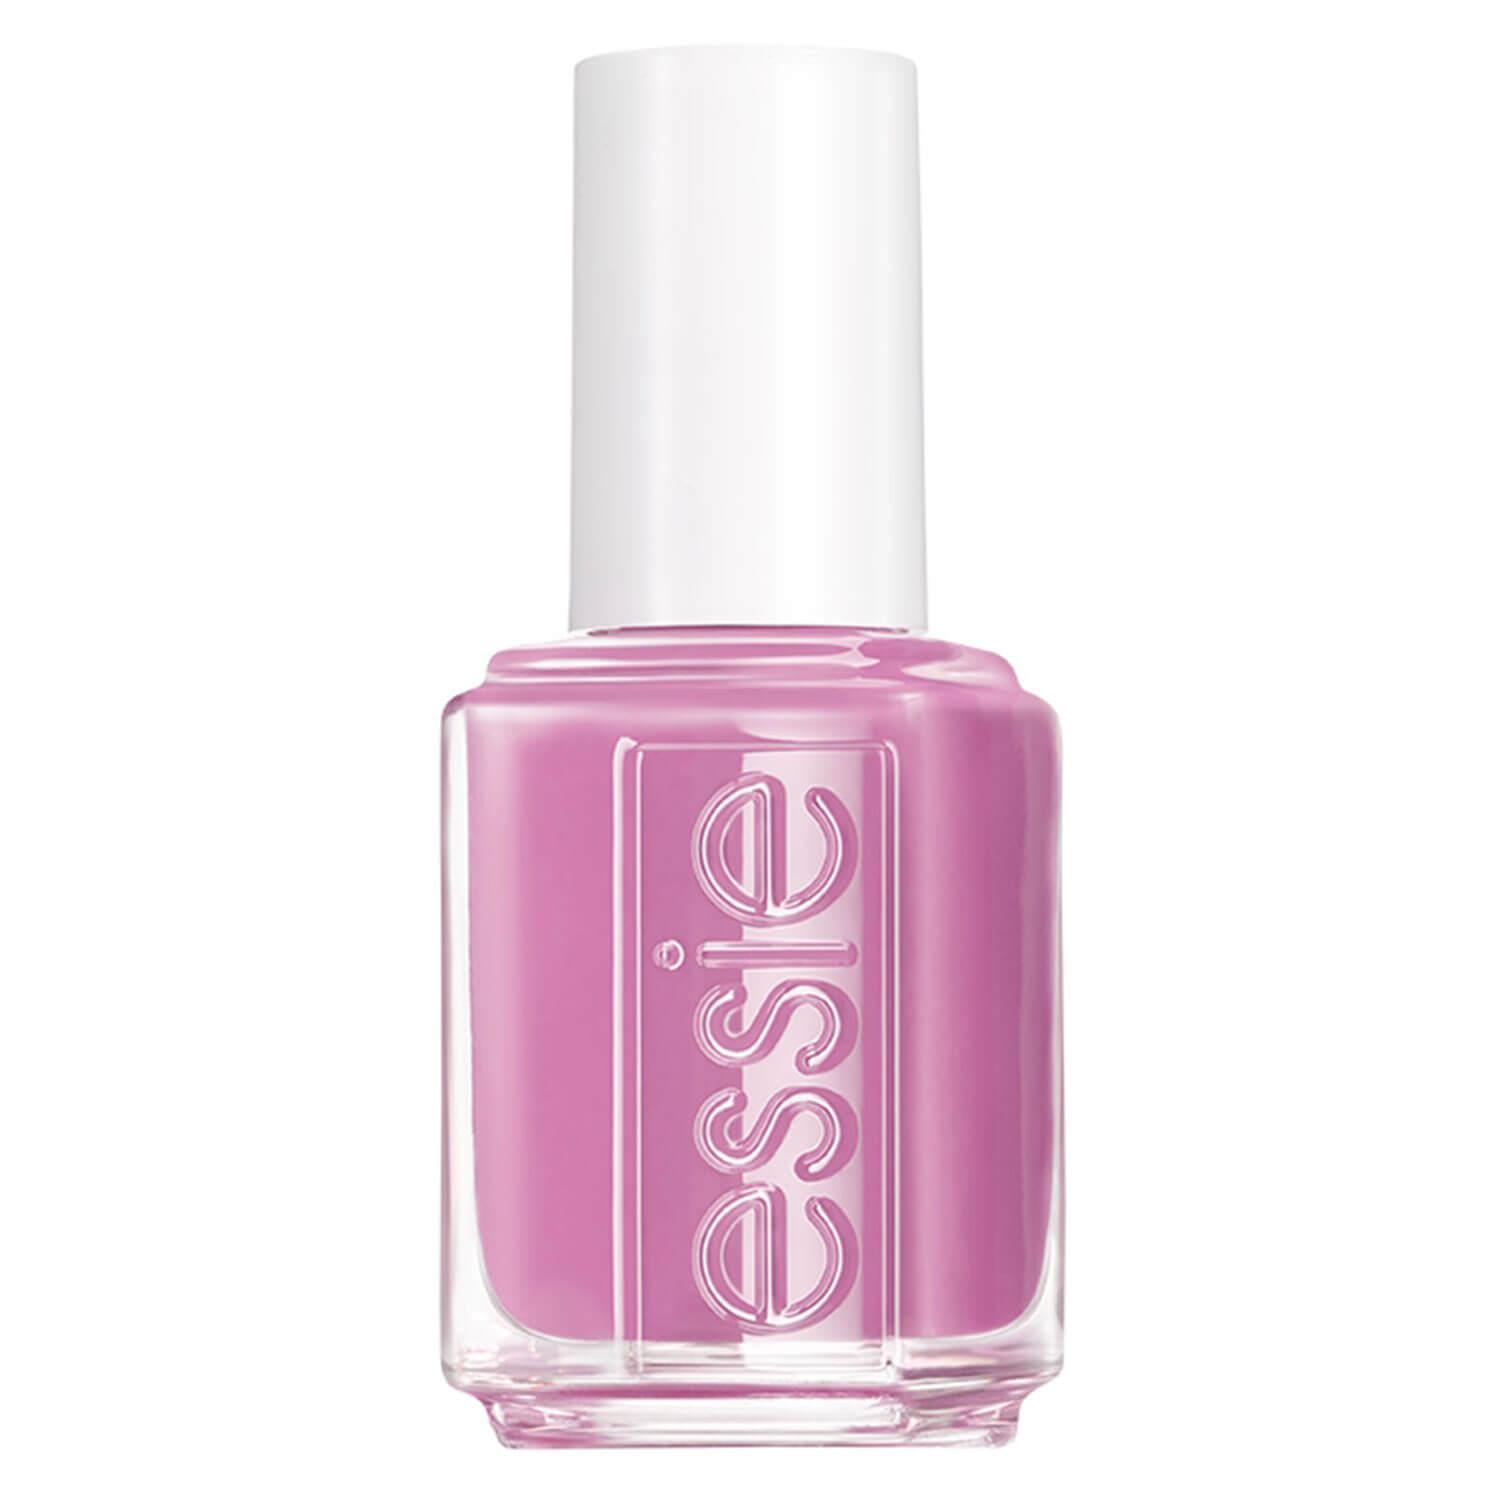 essie nail polish - suits you swell 718